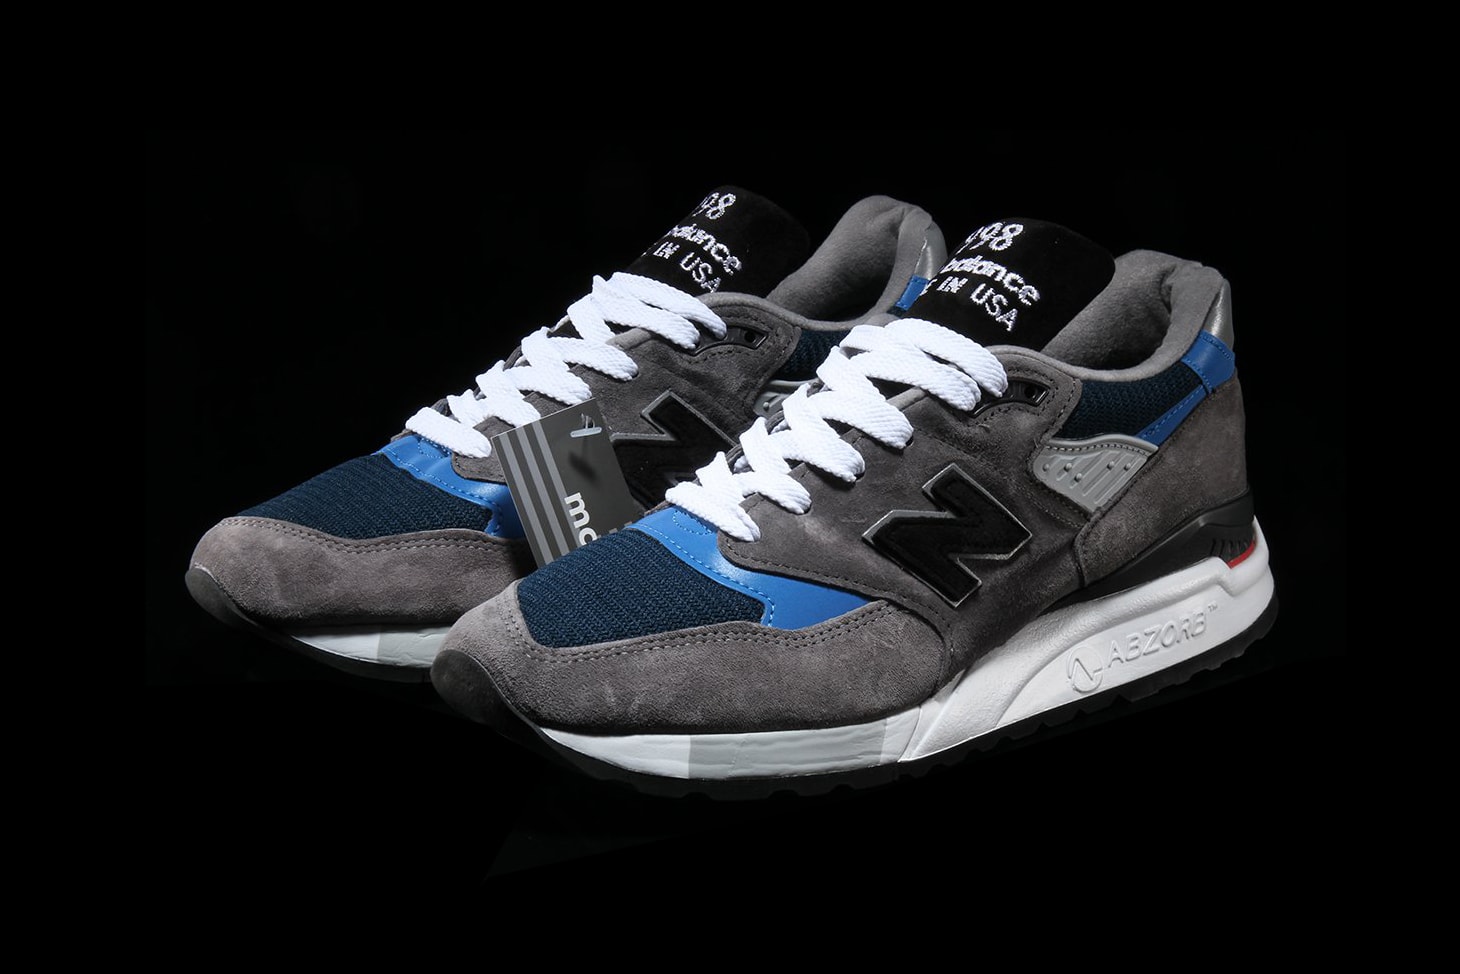 New Balance 998 Made in USA Shoe Details Cop Purchase Buy Trainers Footwear Sneakers America Grey Blue